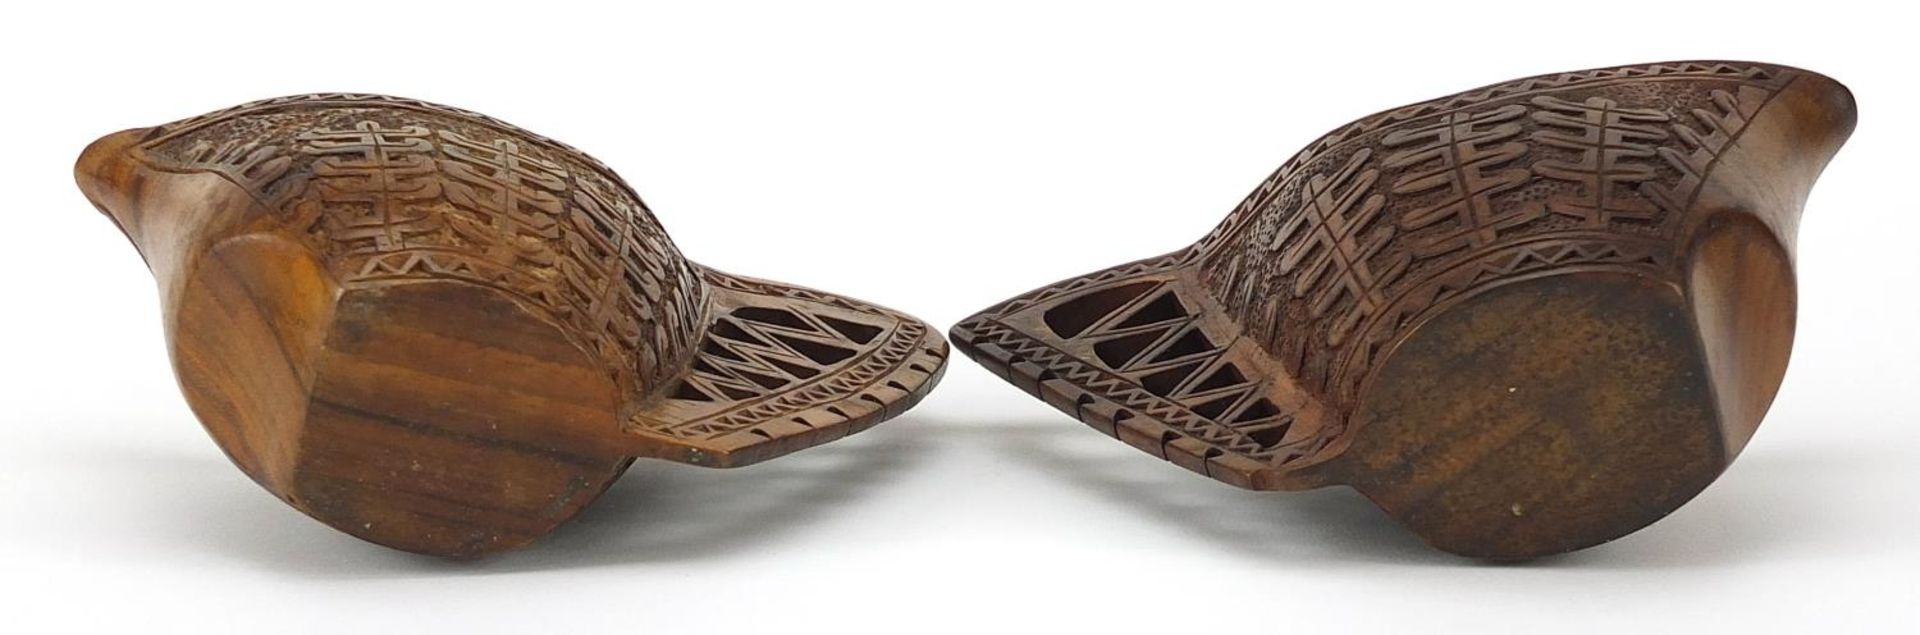 Pair of Scandinavian carved hardwood cups, the largest approximately 15.5cm - Image 3 of 3